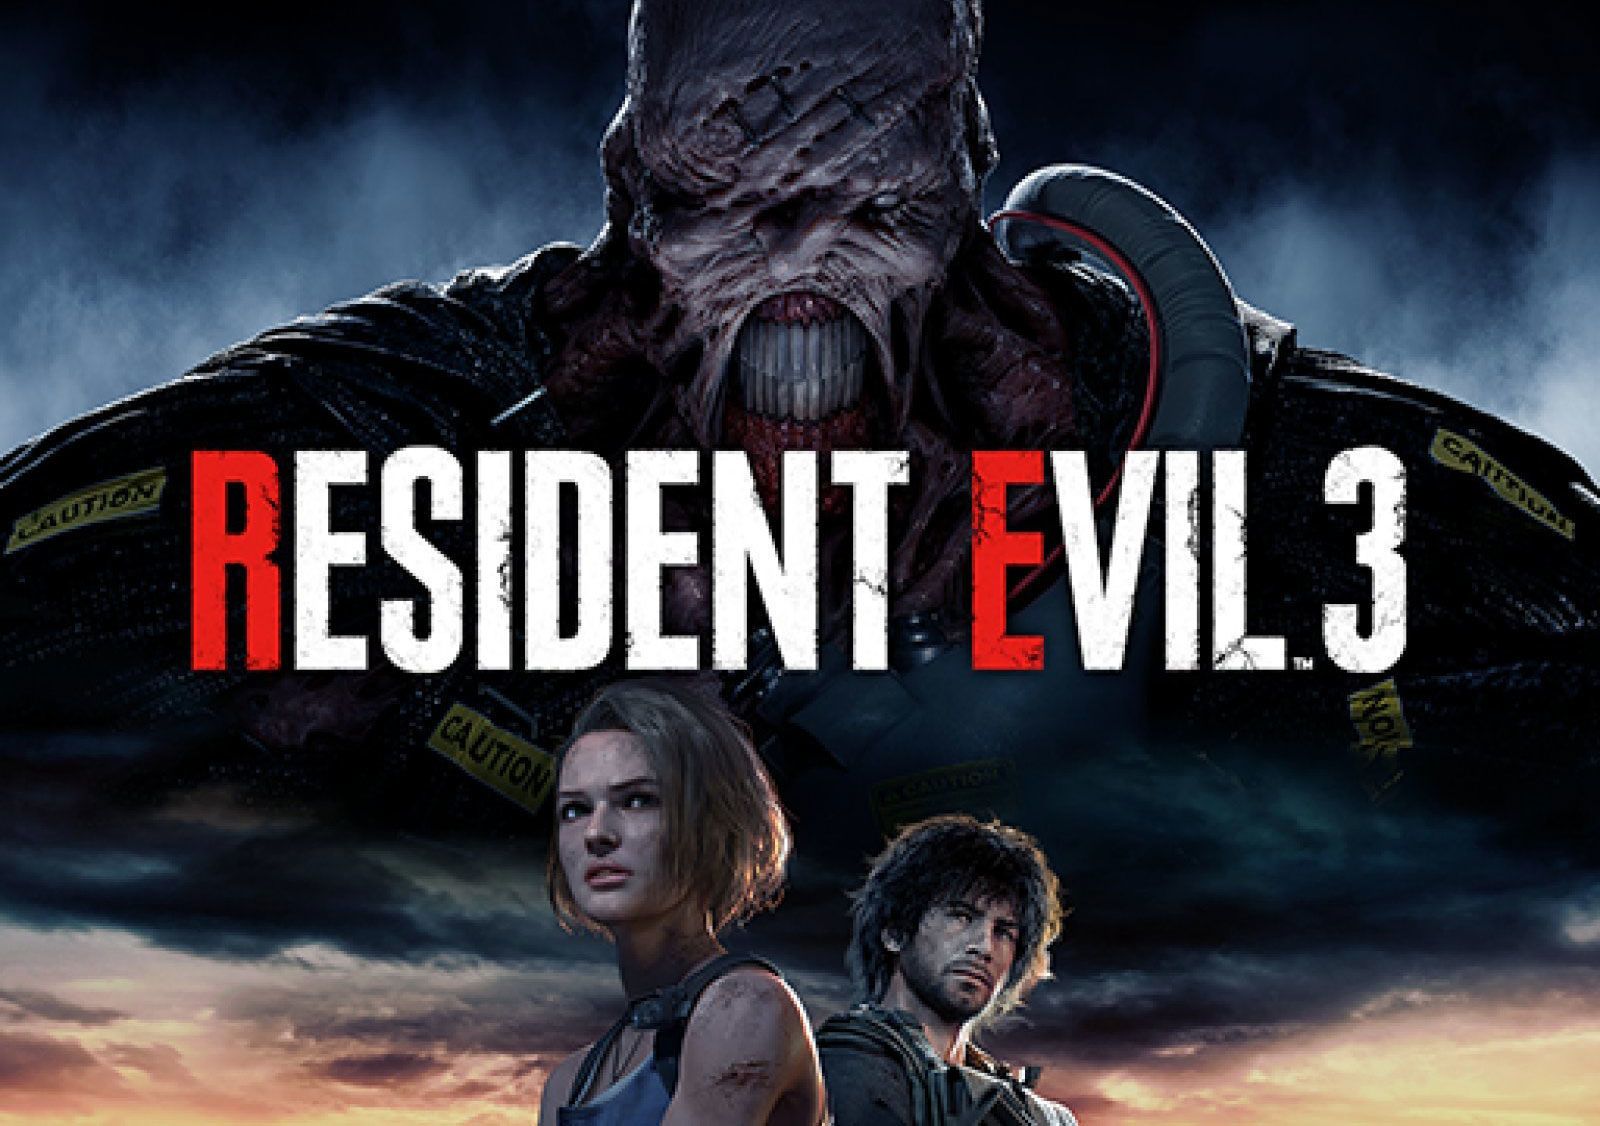 Resident Evil 3' remake hits PS Xbox One and PC on April 3rd